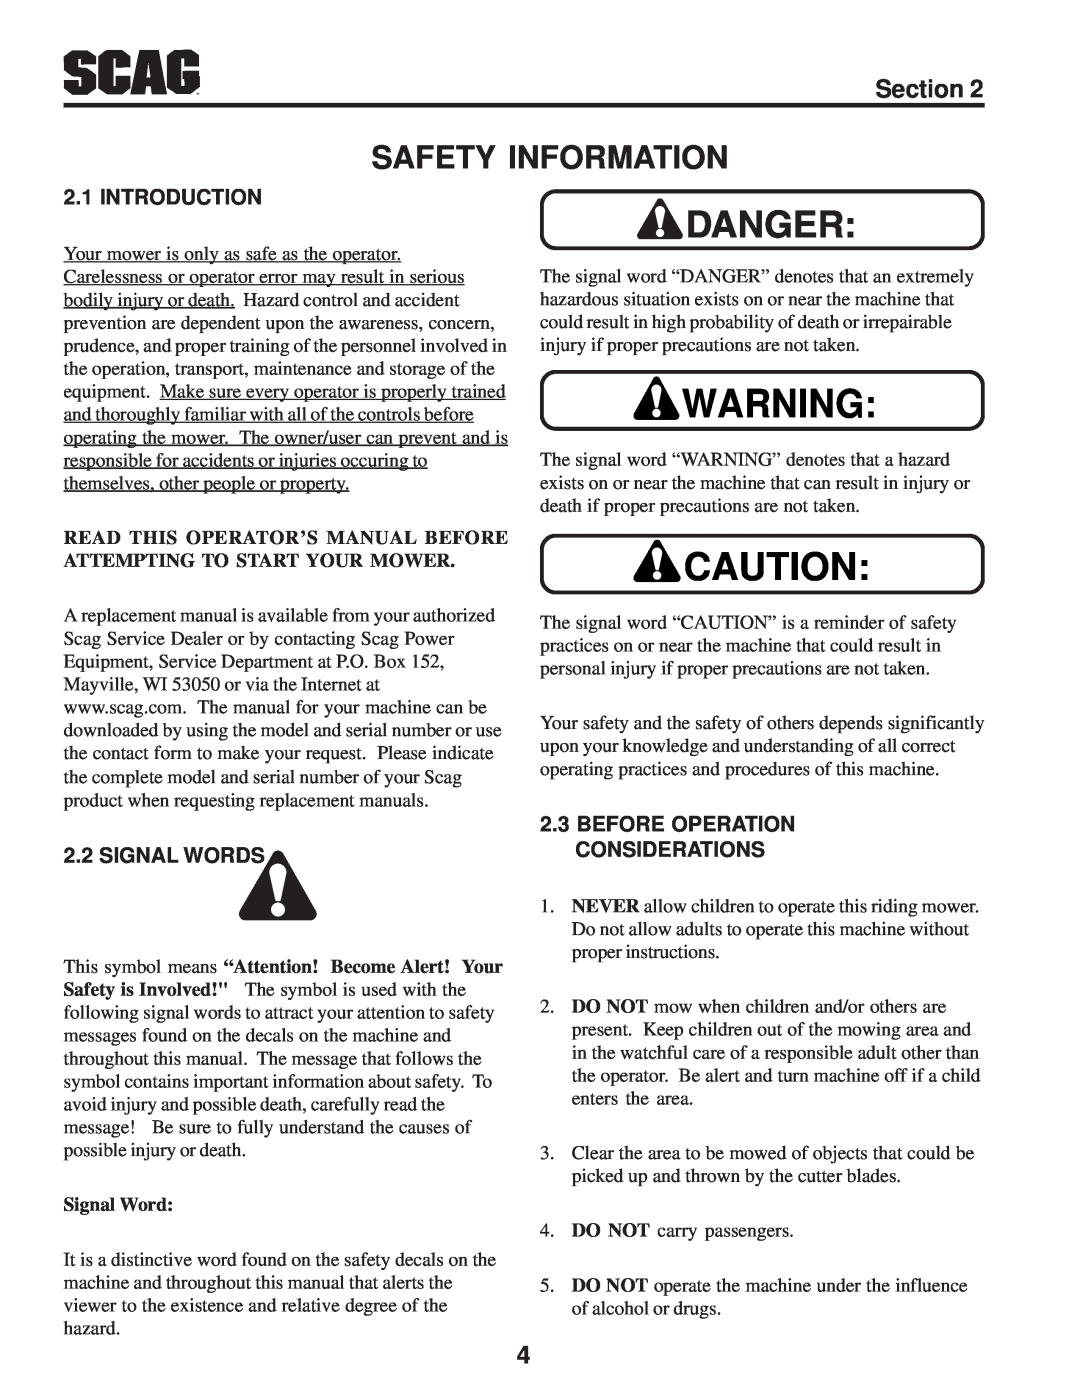 Scag Power Equipment STT-31BSD Safety Information, Introduction, Signal Words, Before Operation Considerations, Section 